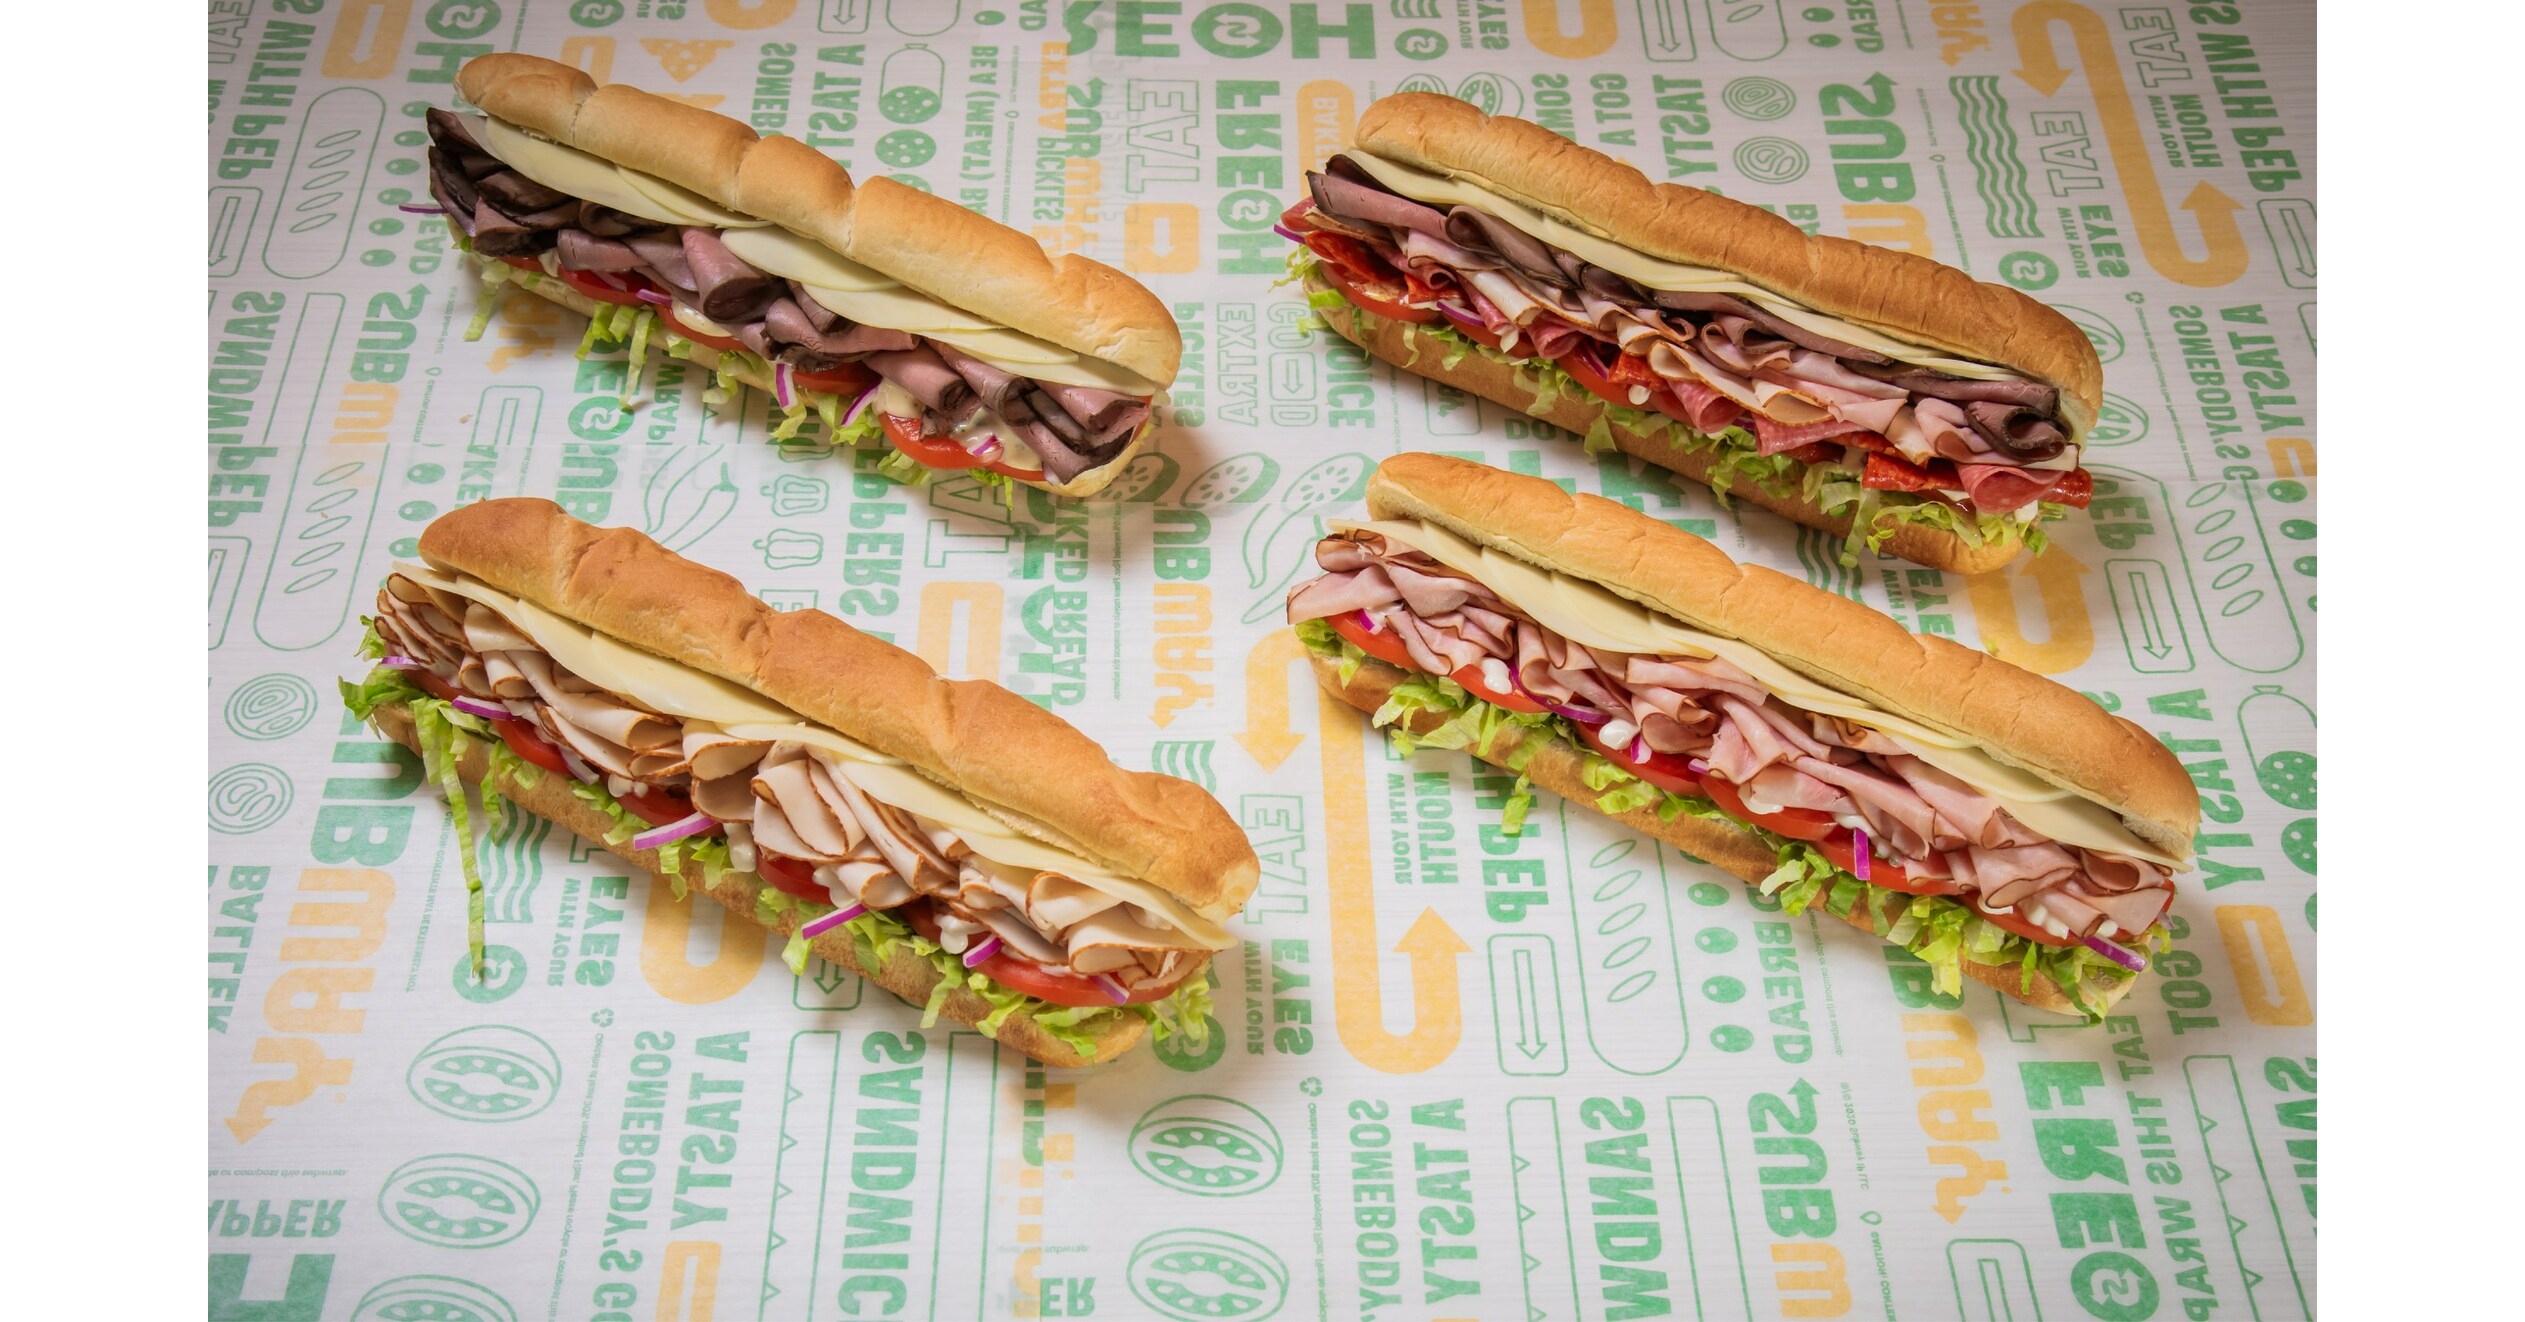 All Sandwiches - Subway Indonesia